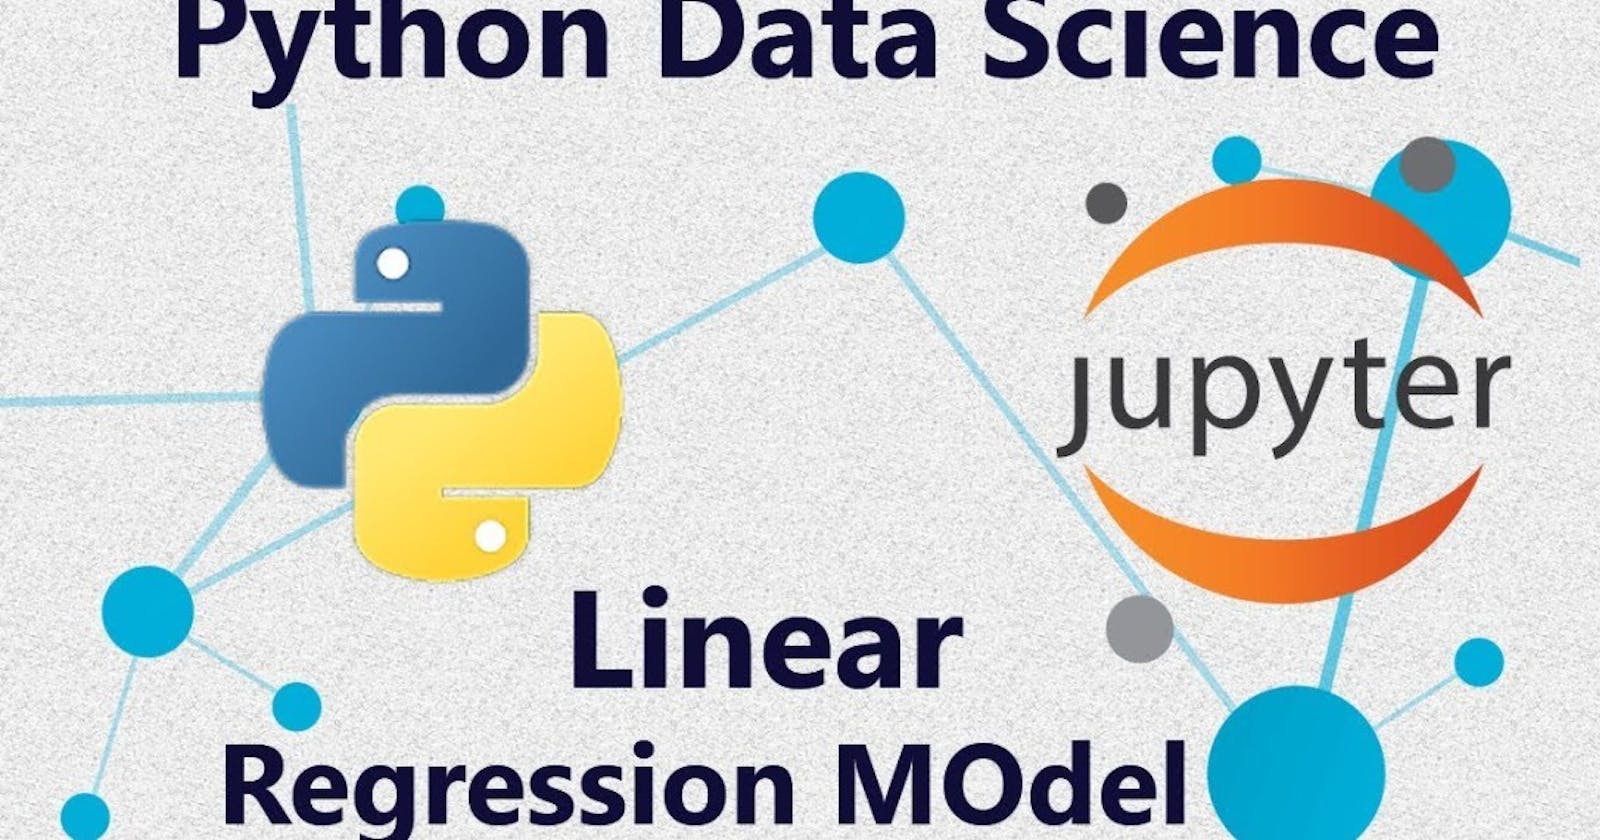 Let's get you  Introduced to Linear Regressions and its Implementations in scikit-learn